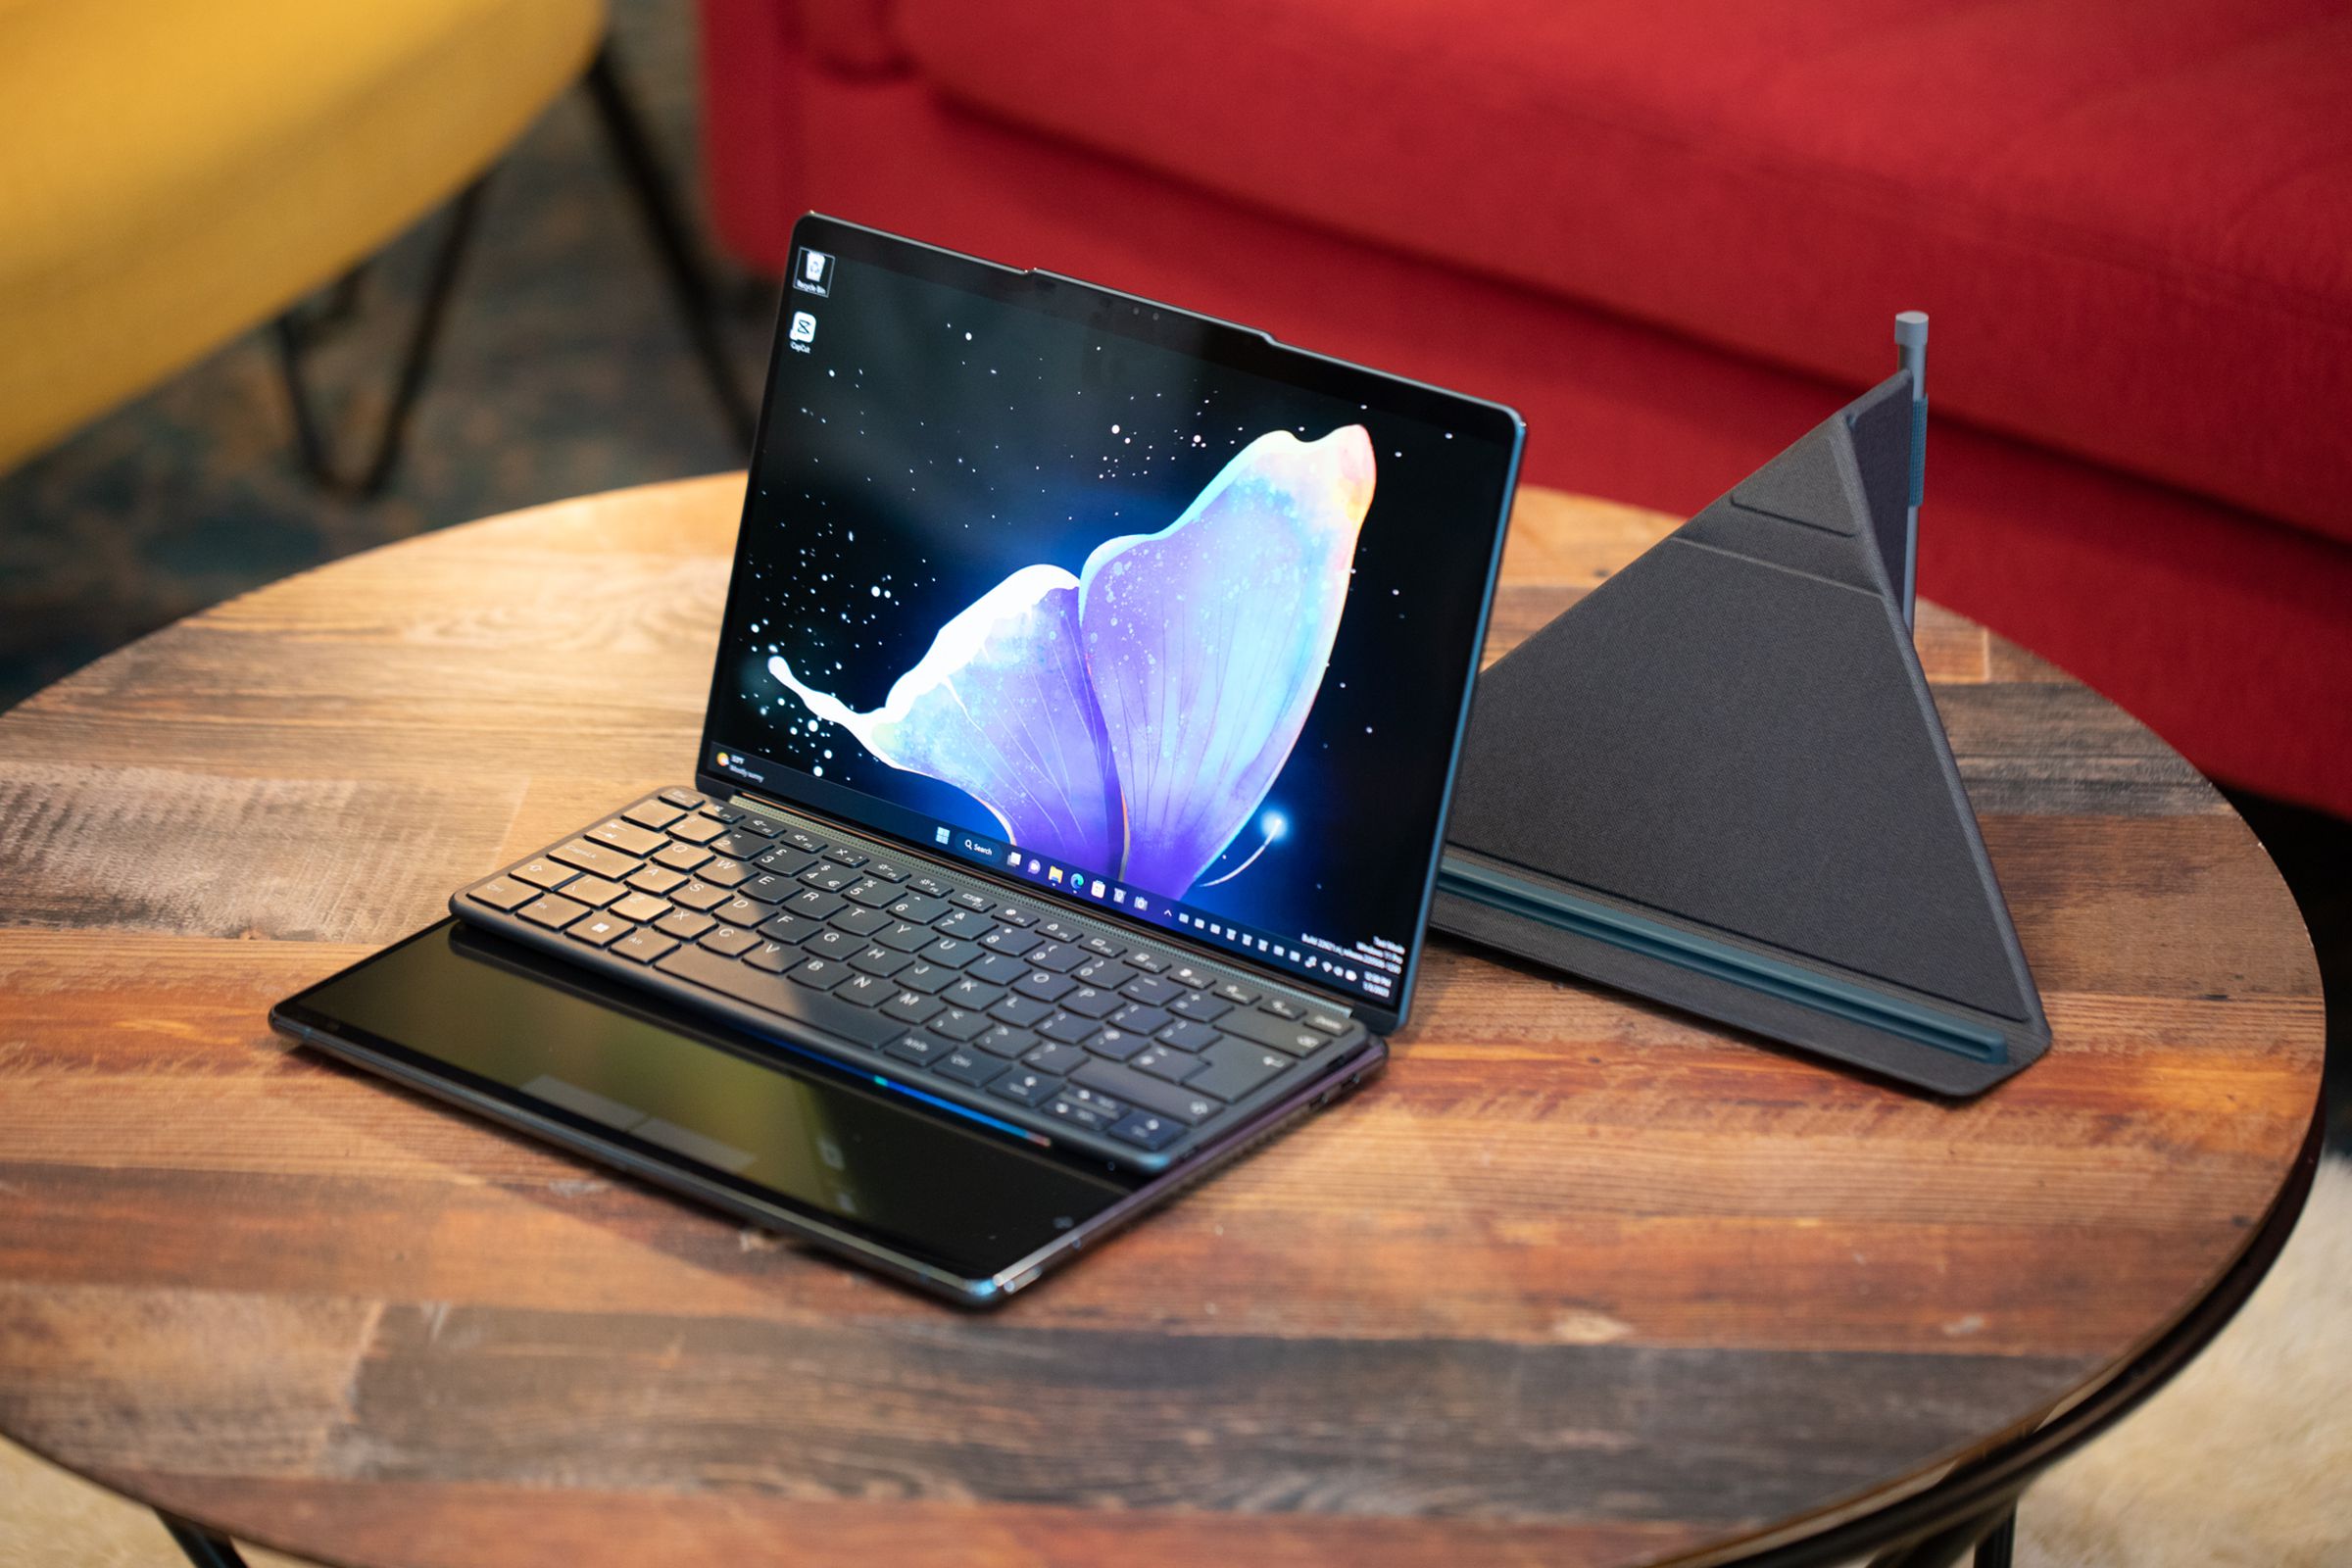 The Lenovo Yoga Book 9i folds into laptop mode with a keyboard attached.